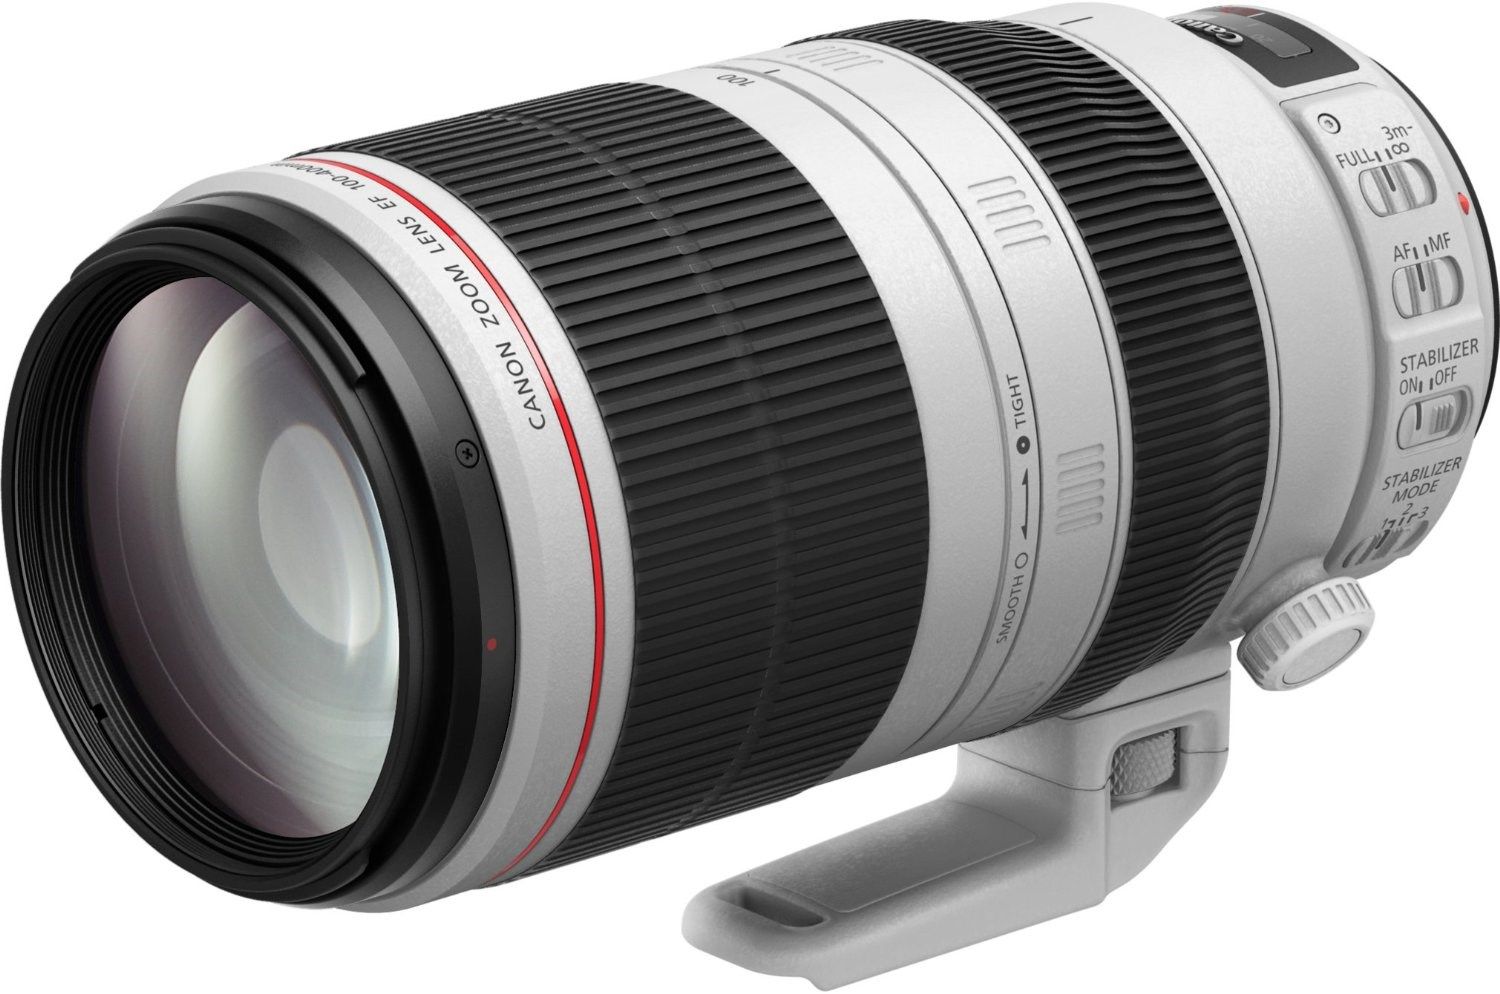 Canon EF 100-400mm f4.5-5.6 L IS II USM Lens - Product Photo 2 - Side View